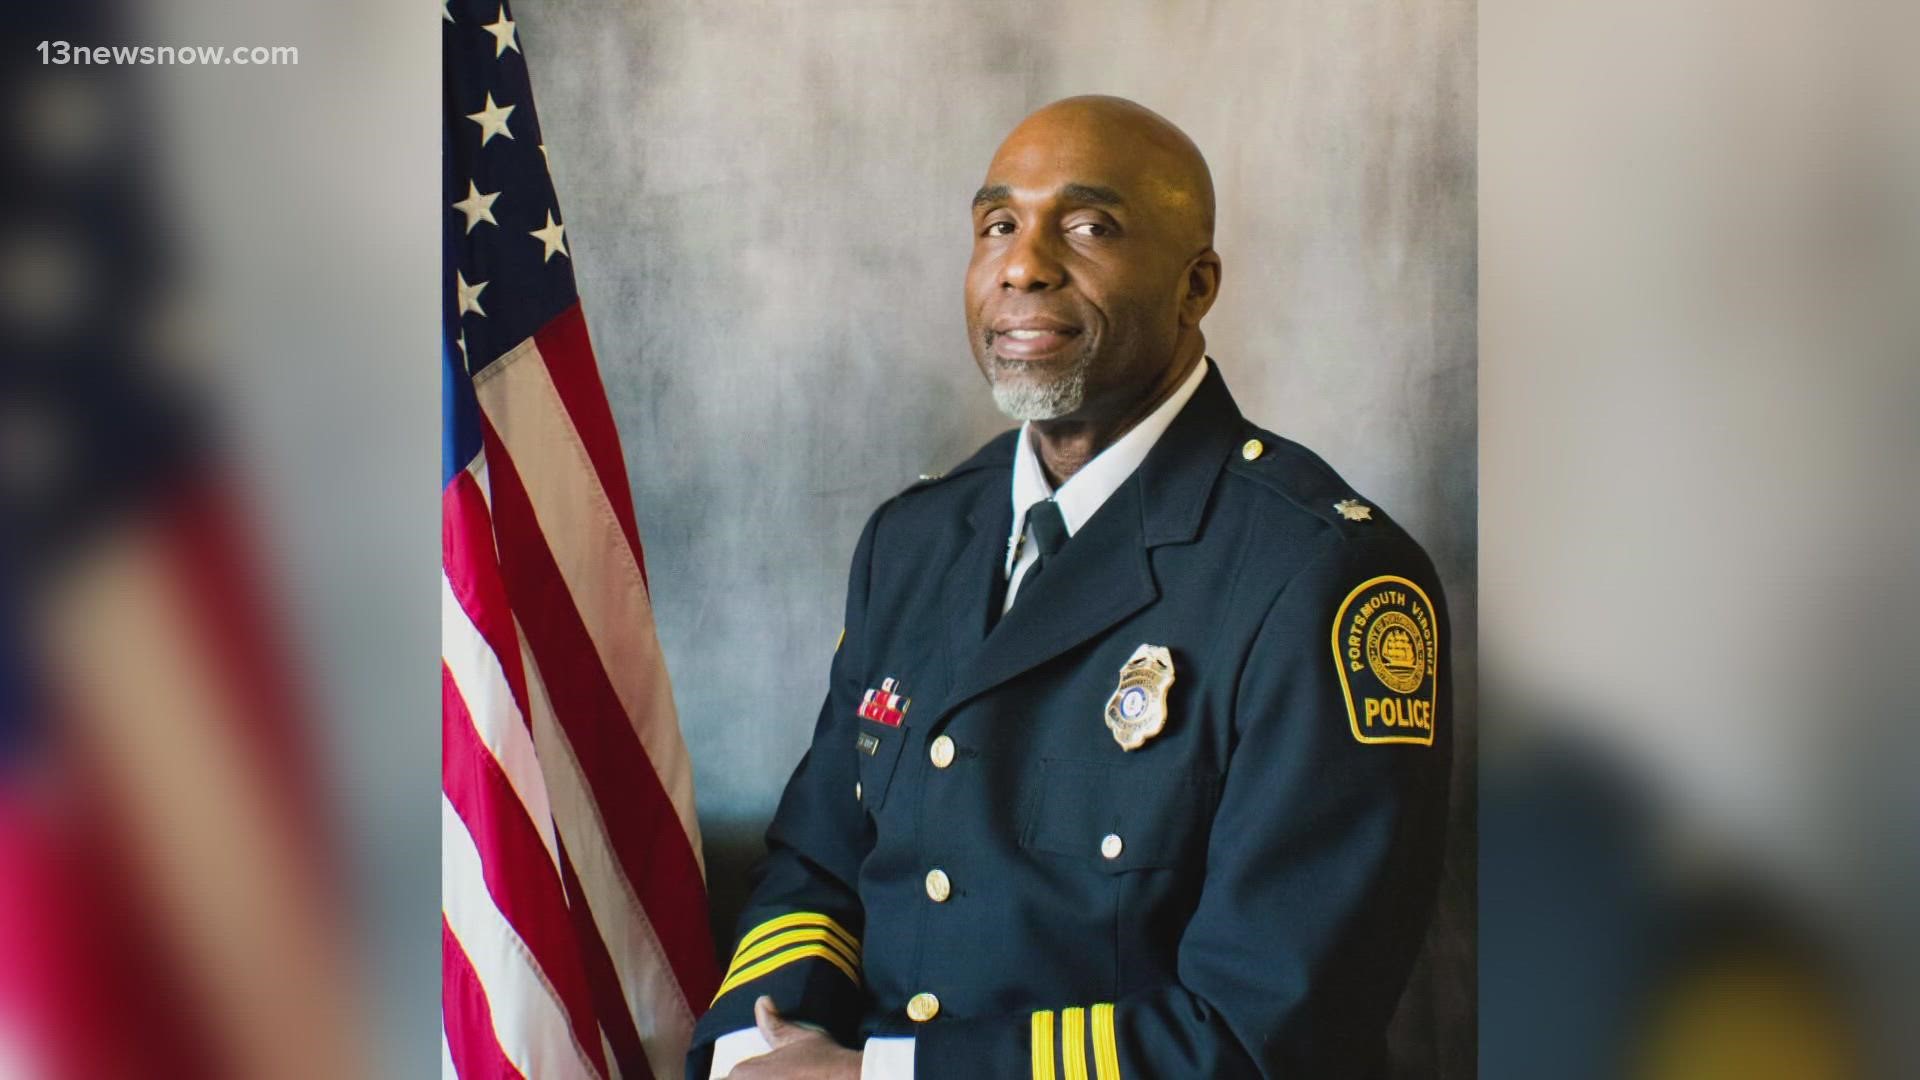 Jenkins has led the city for six months since former Police Chief Renado Prince was ousted by the then-City Manager Tonya Chapman.